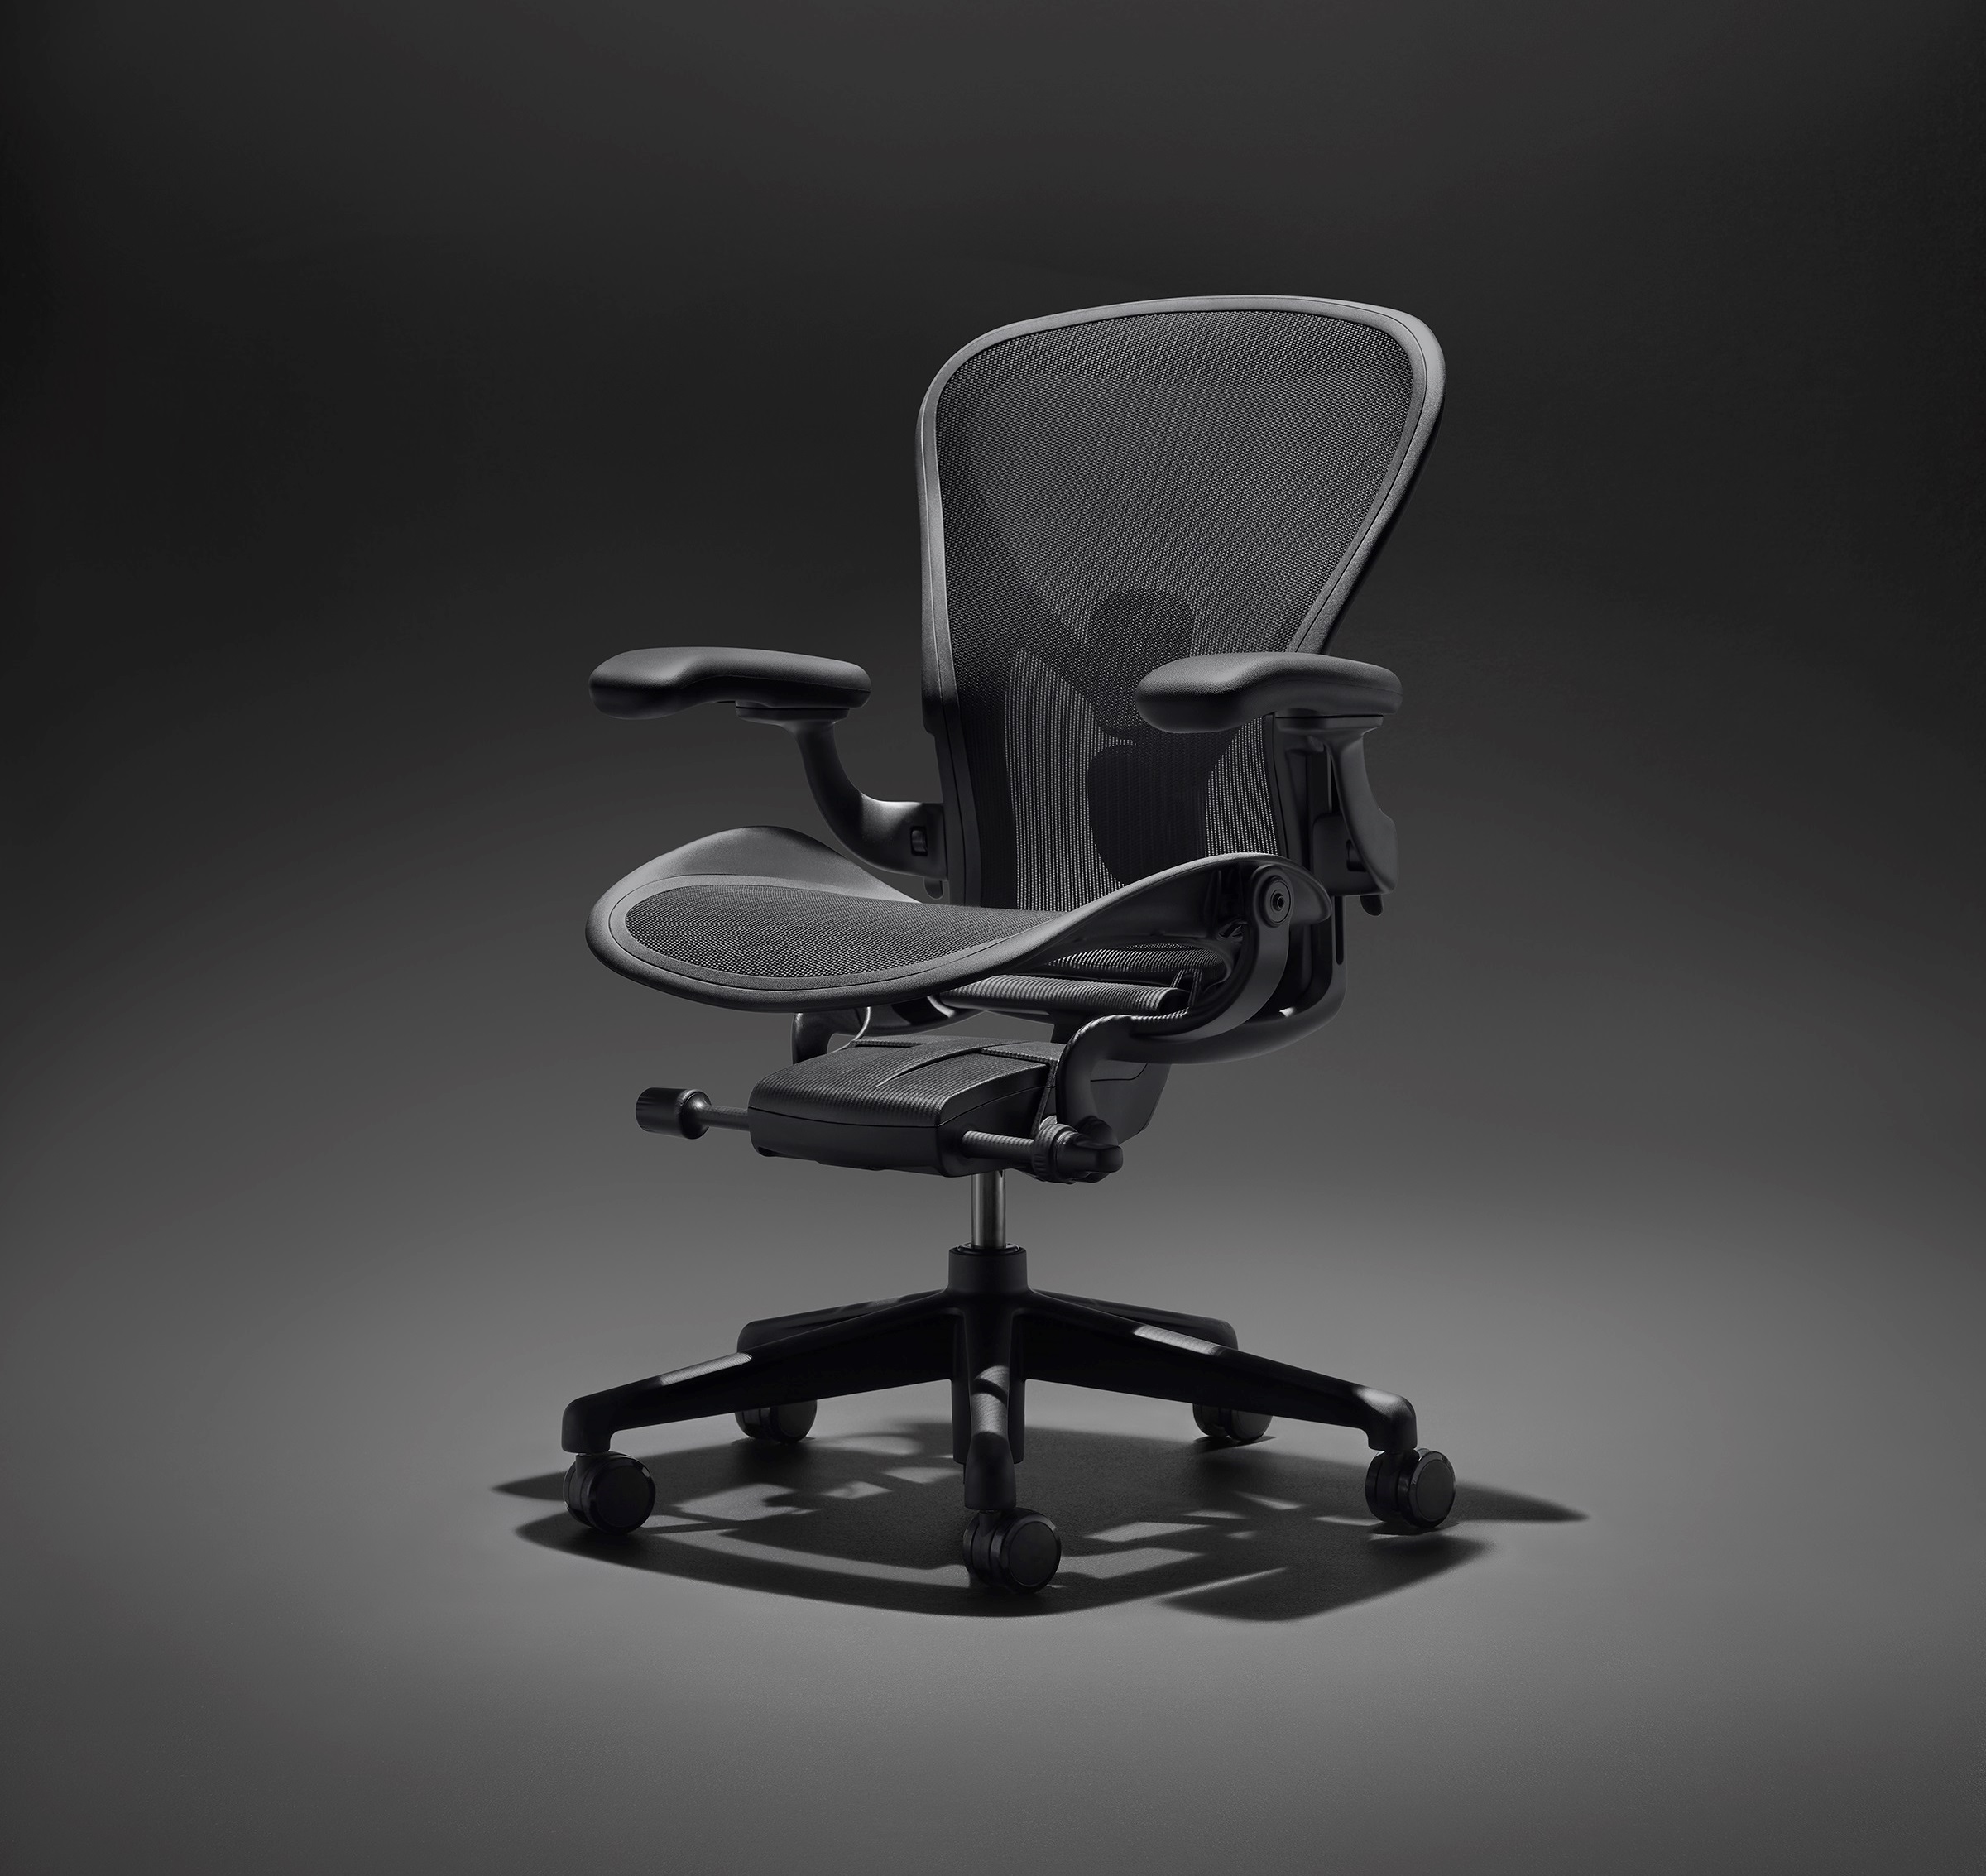 The New Aeron Onyx by Herman Miller, made with Ocean Bound Plastics